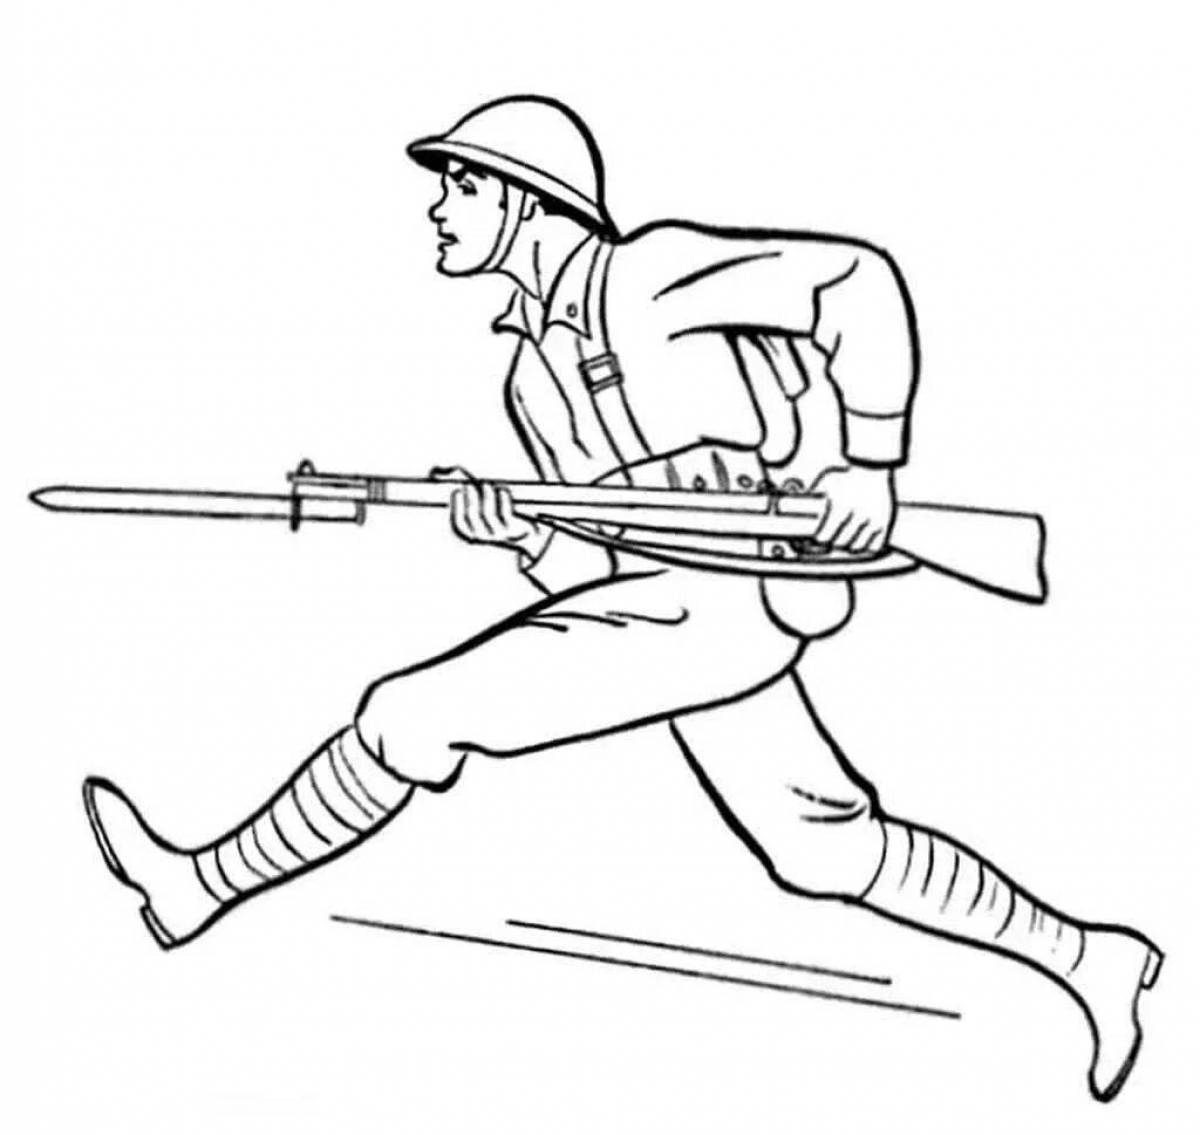 Entertaining coloring of a soldier for children